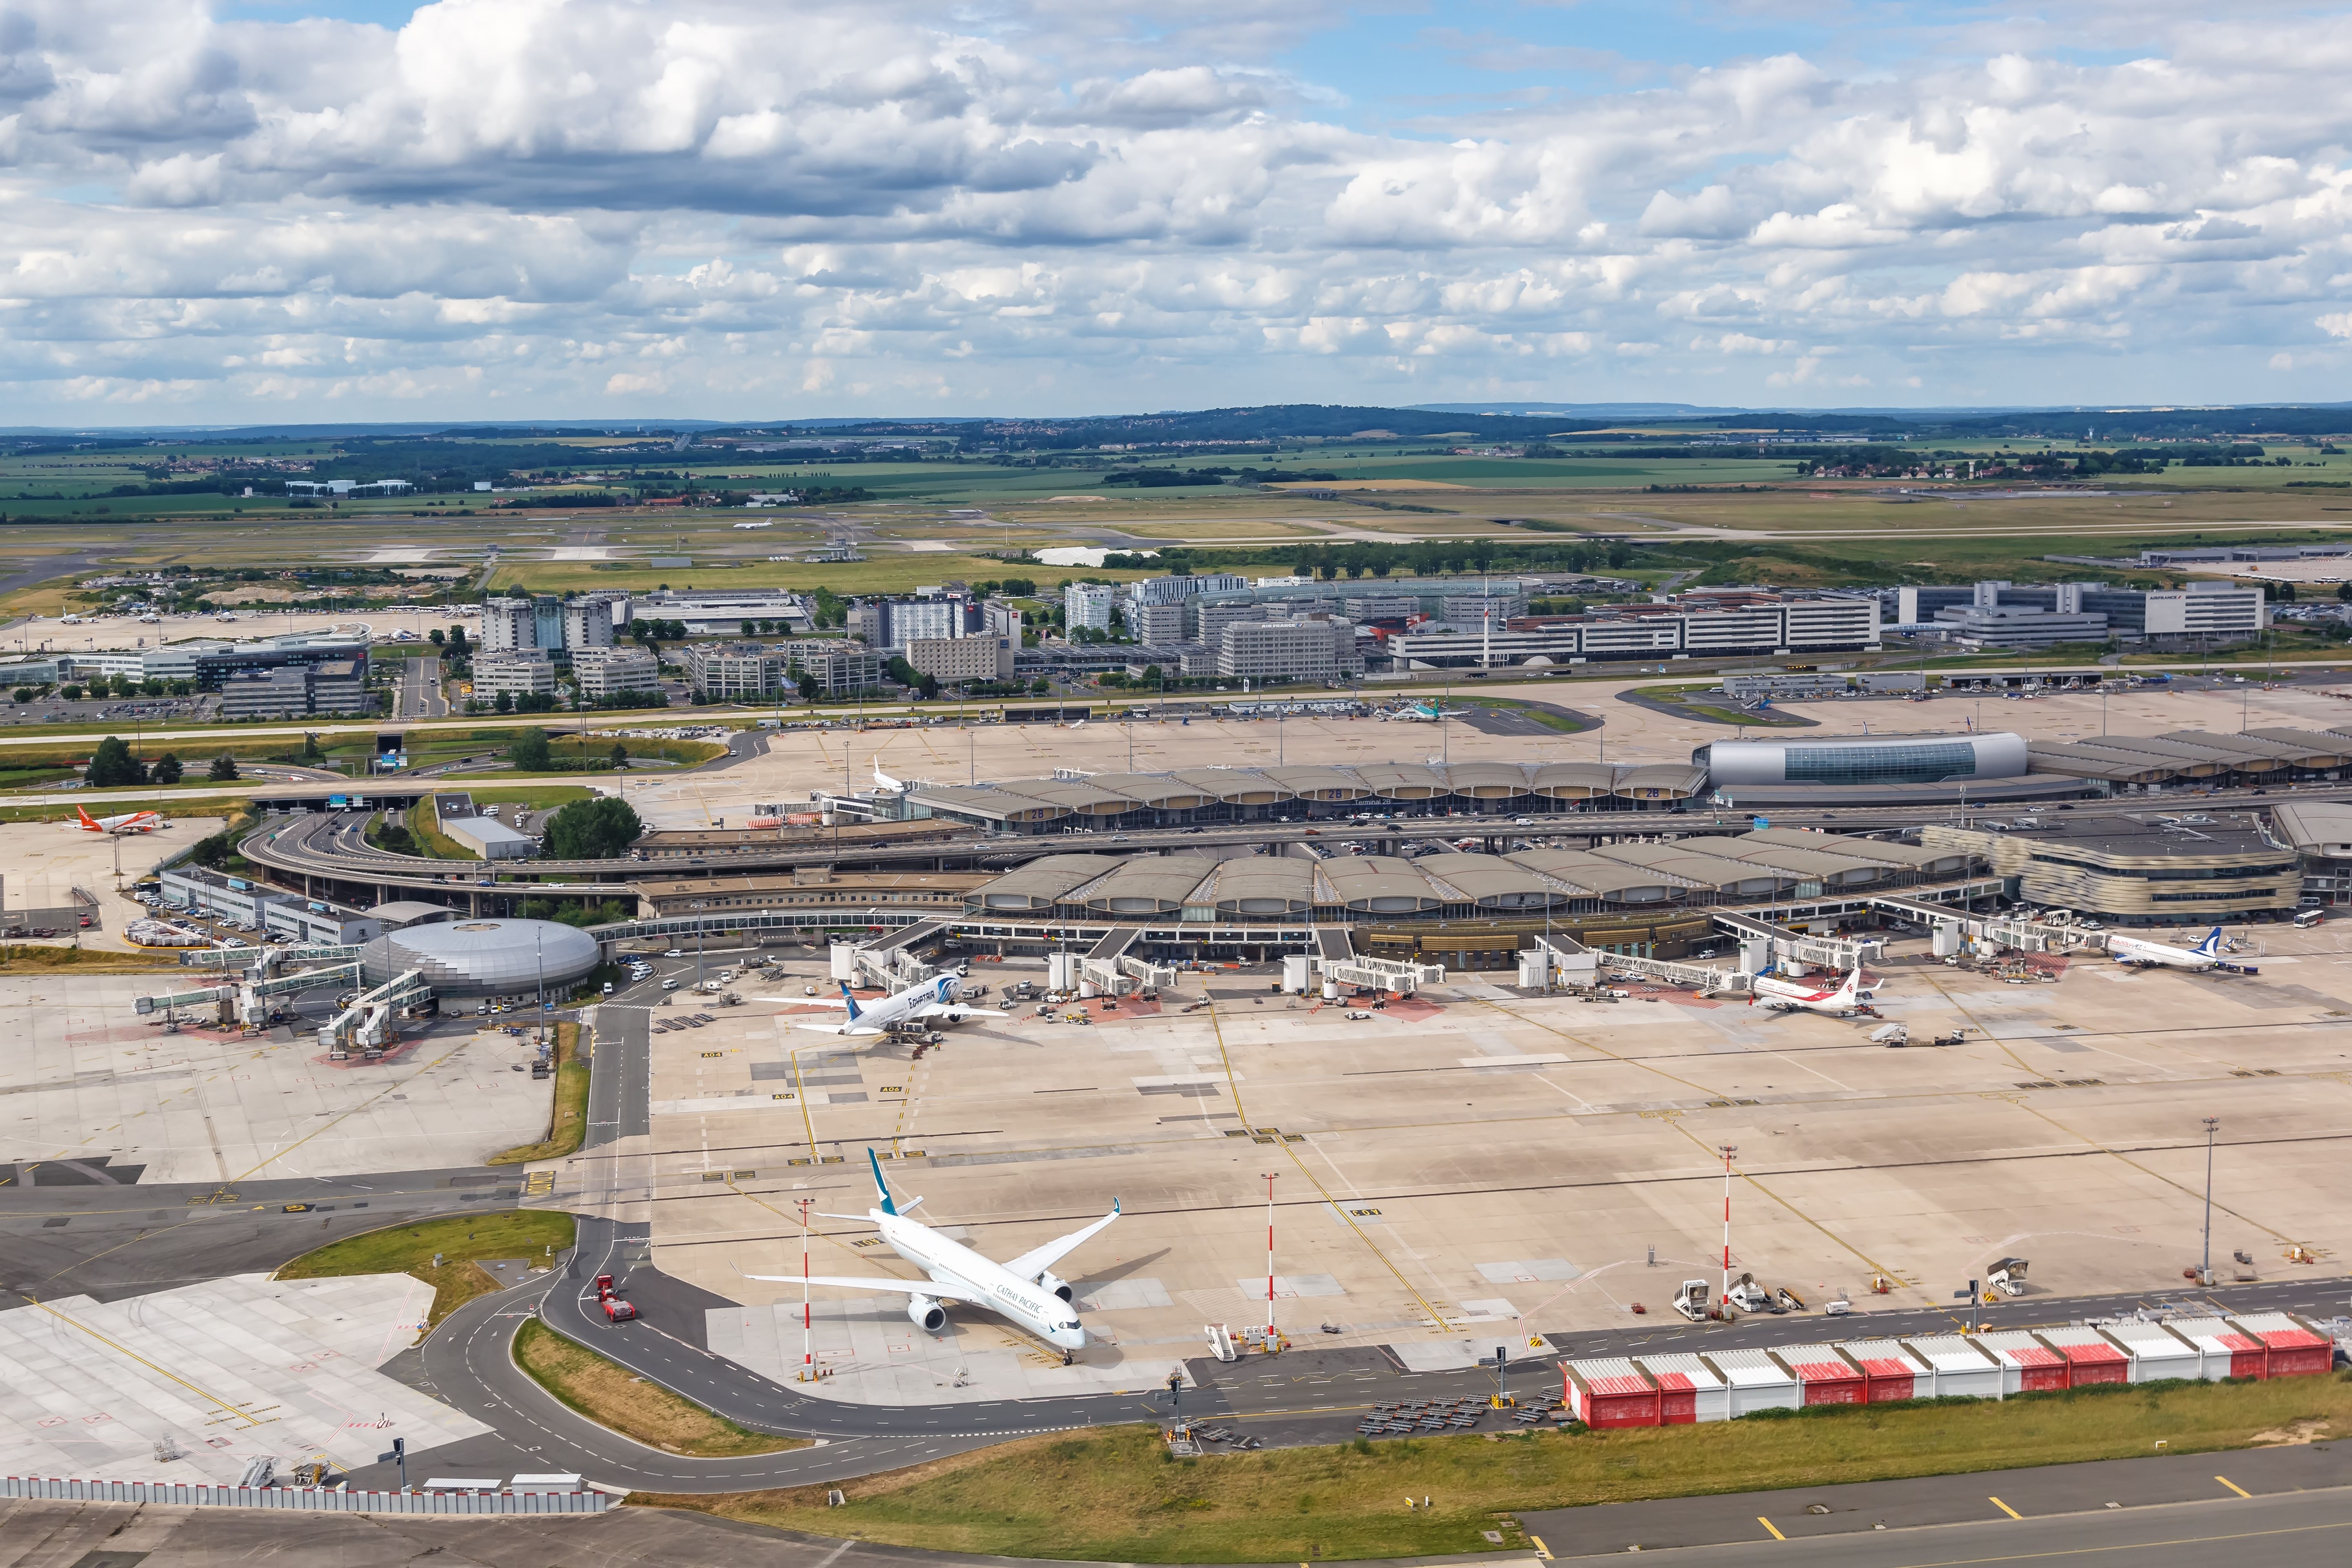 An aerial view of the apron at Paris Charles de Gaulle terminal 2.